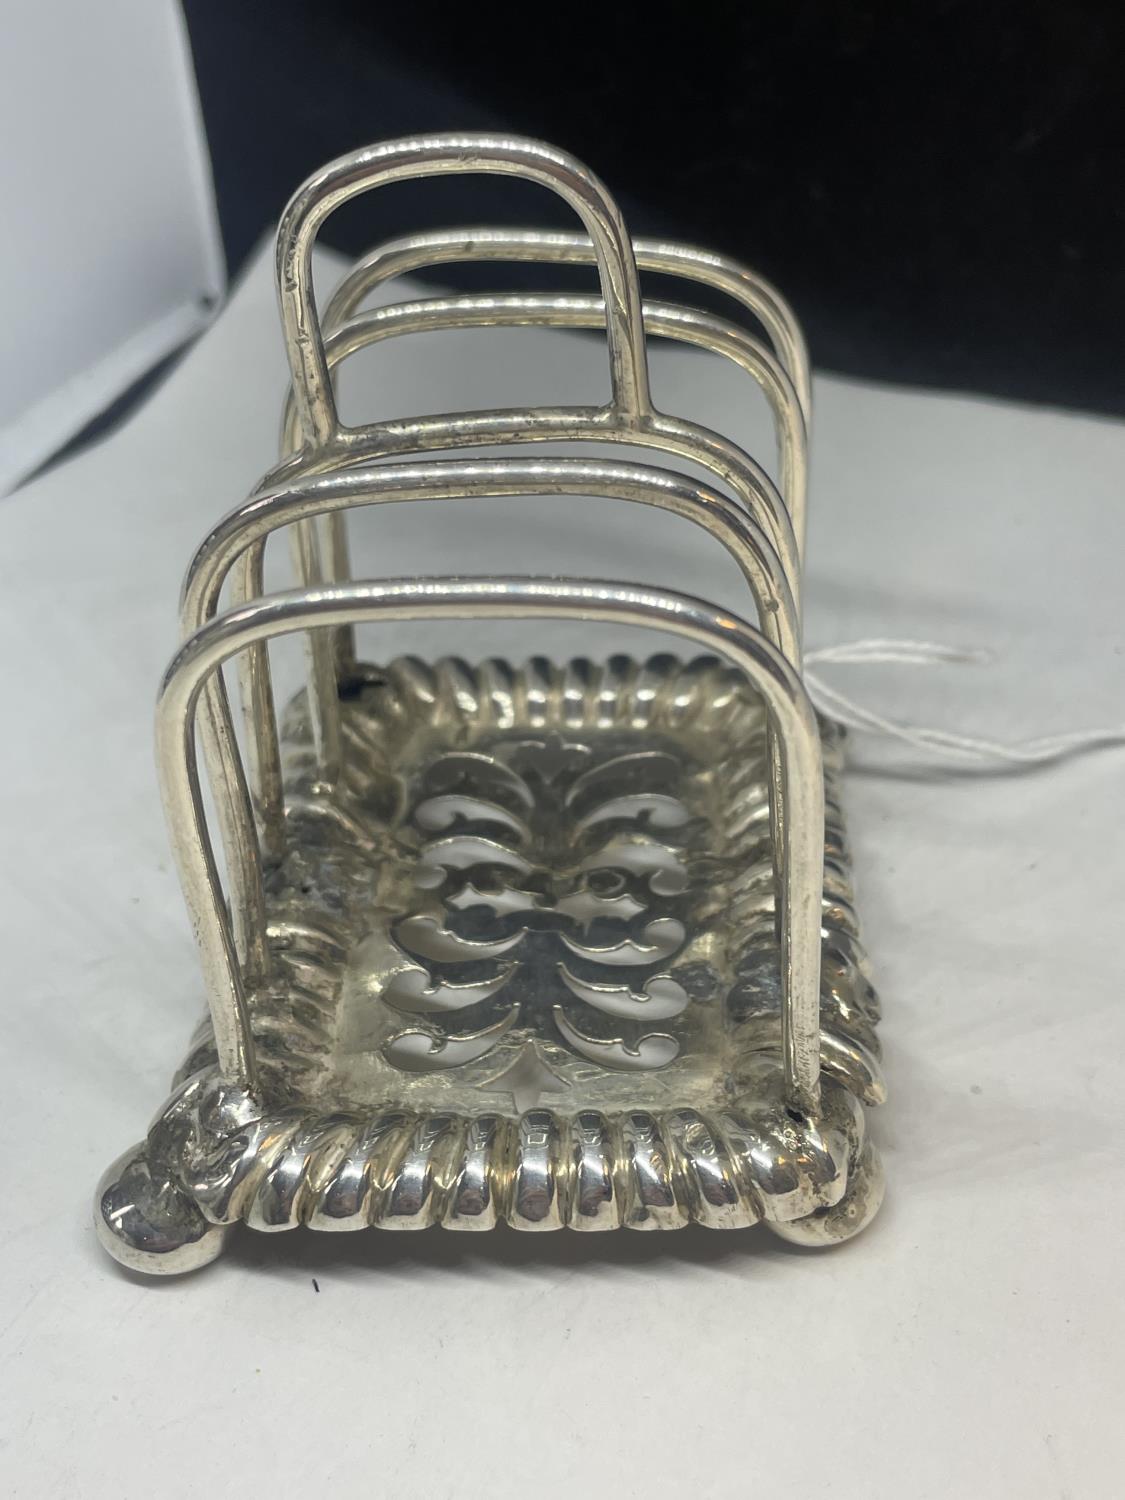 A HALLMARKED SHEFFIELD SILVER TOAST RACK GROSS WEIGHT 103.9 GRAMS - Image 2 of 4